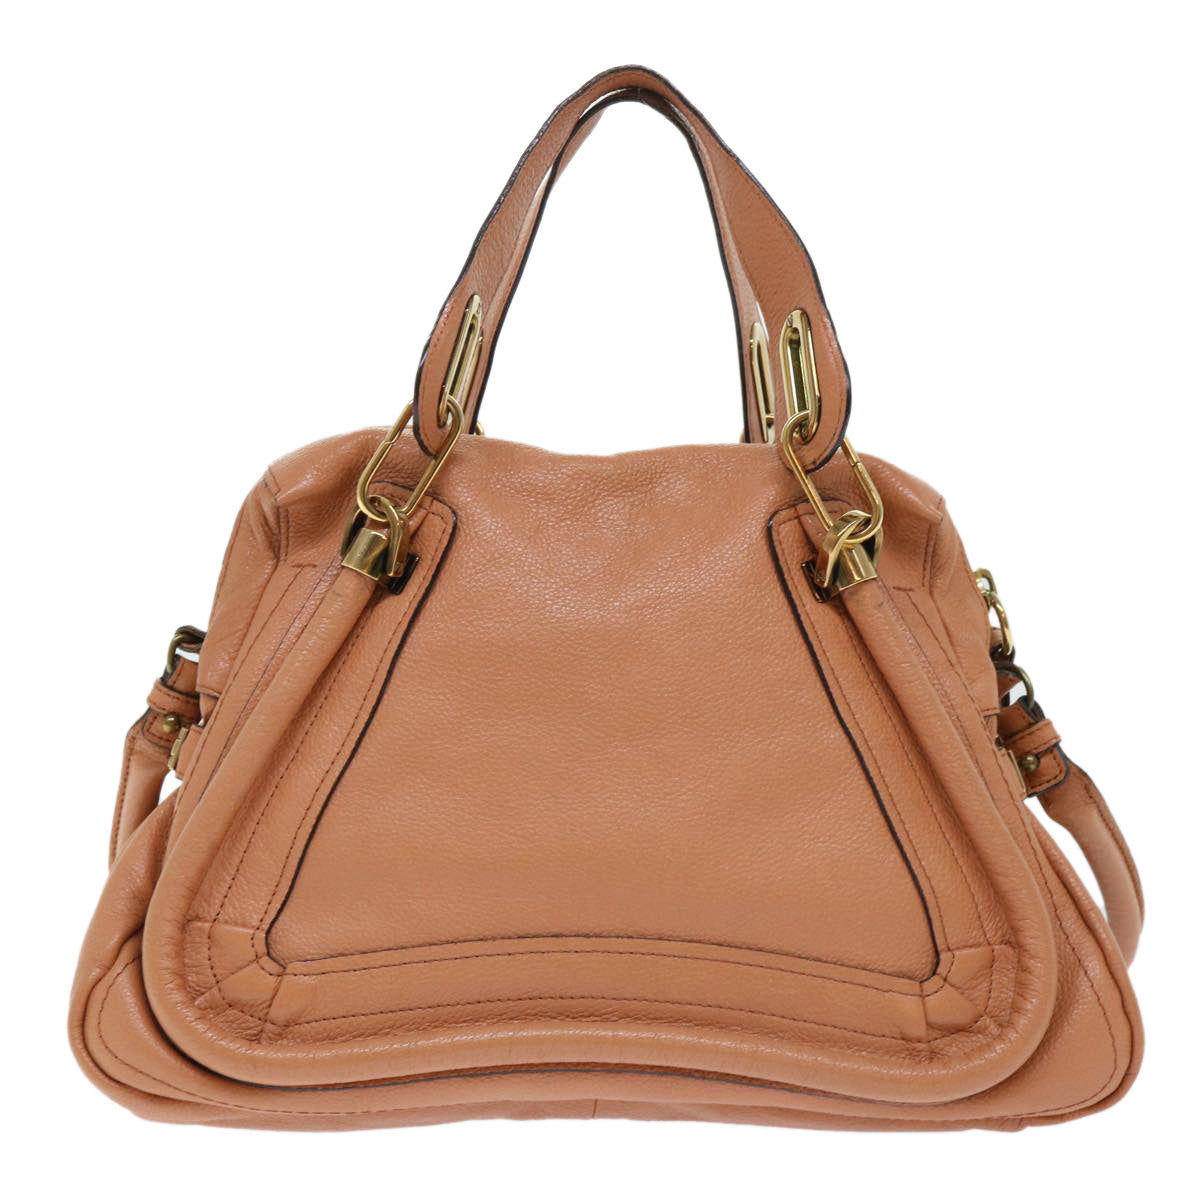 Chloe Paraty Hand Bag Leather 2way Brown 02-11-50 Auth am4850 - 0